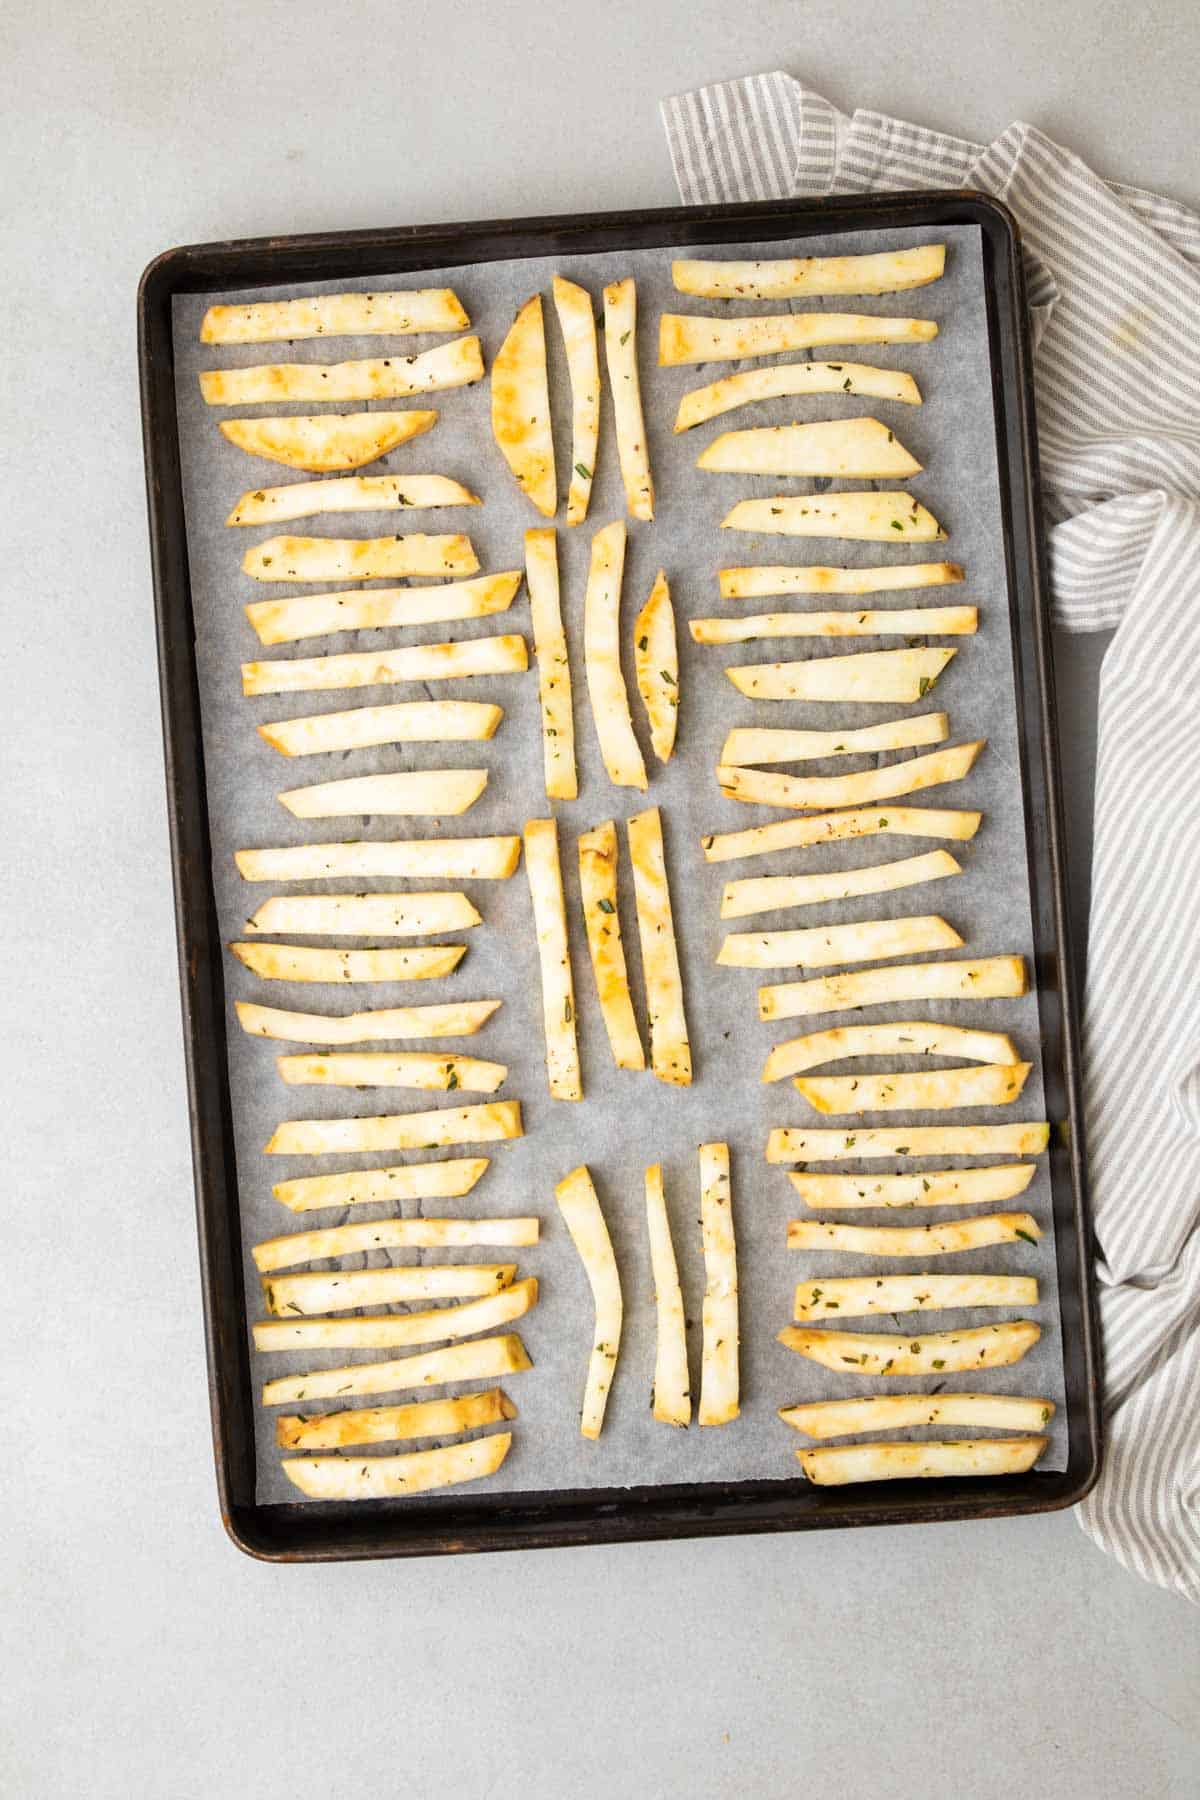 Fries in a single layer on a baking sheet, ready to go in the oven, as seen from above